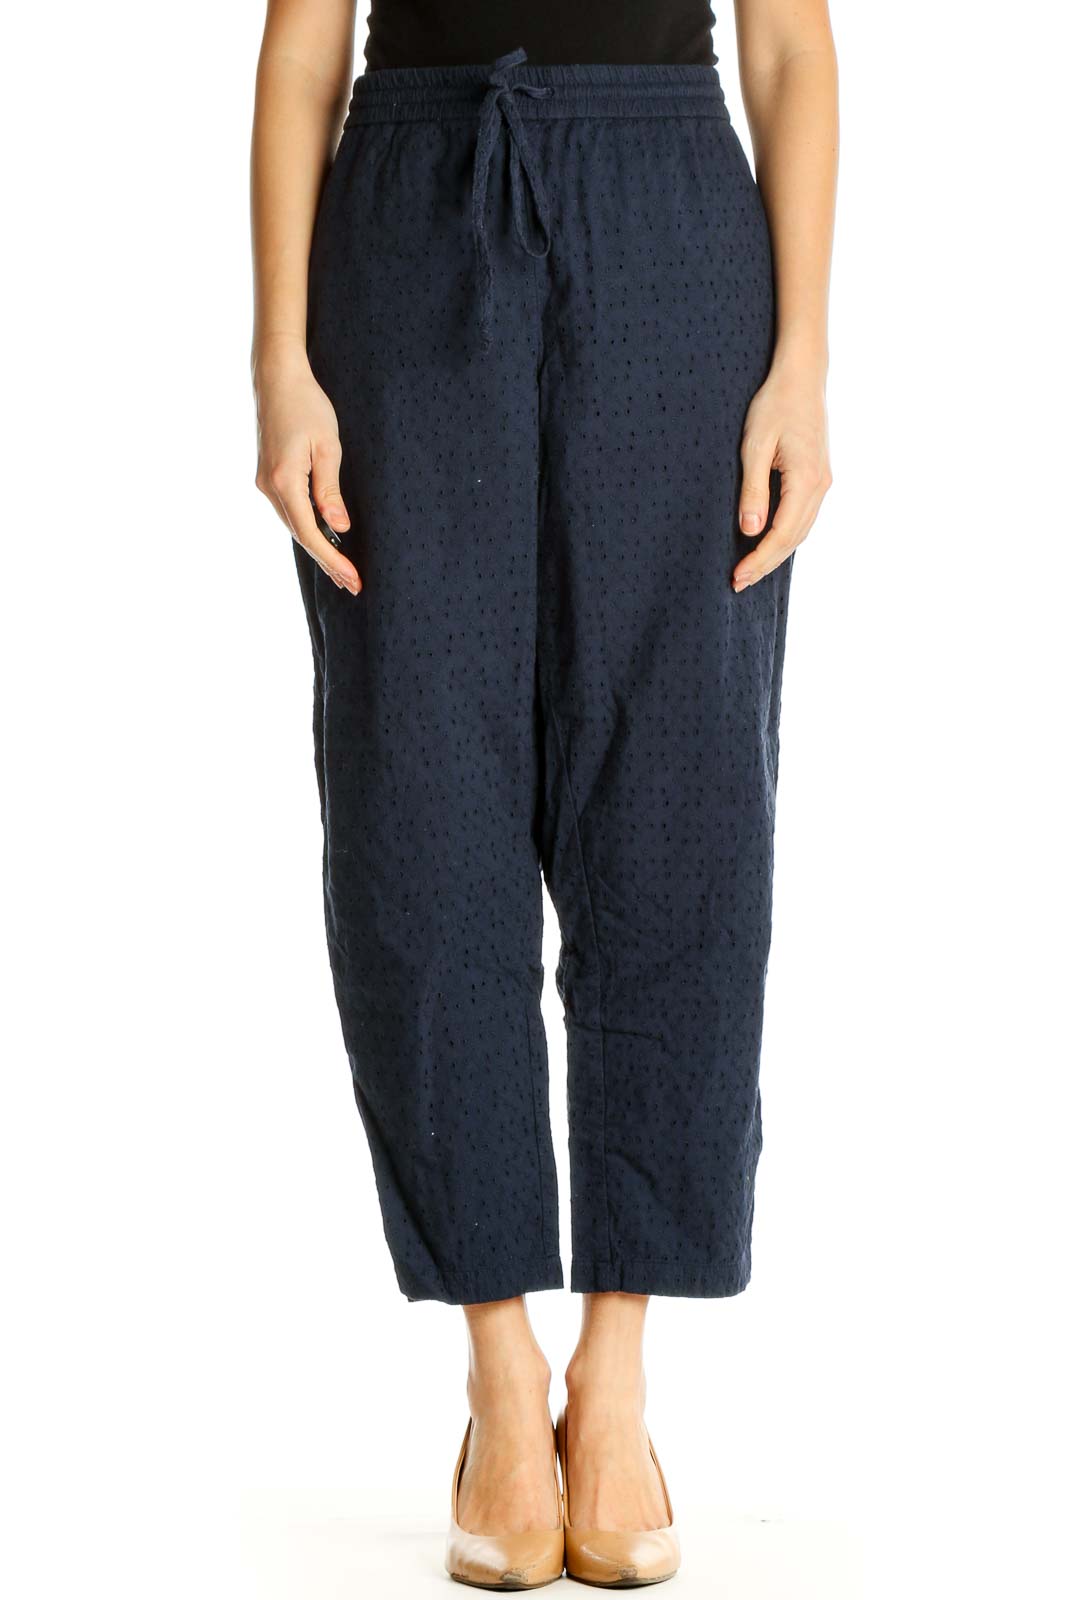 Blue Solid Casual Trousers Front